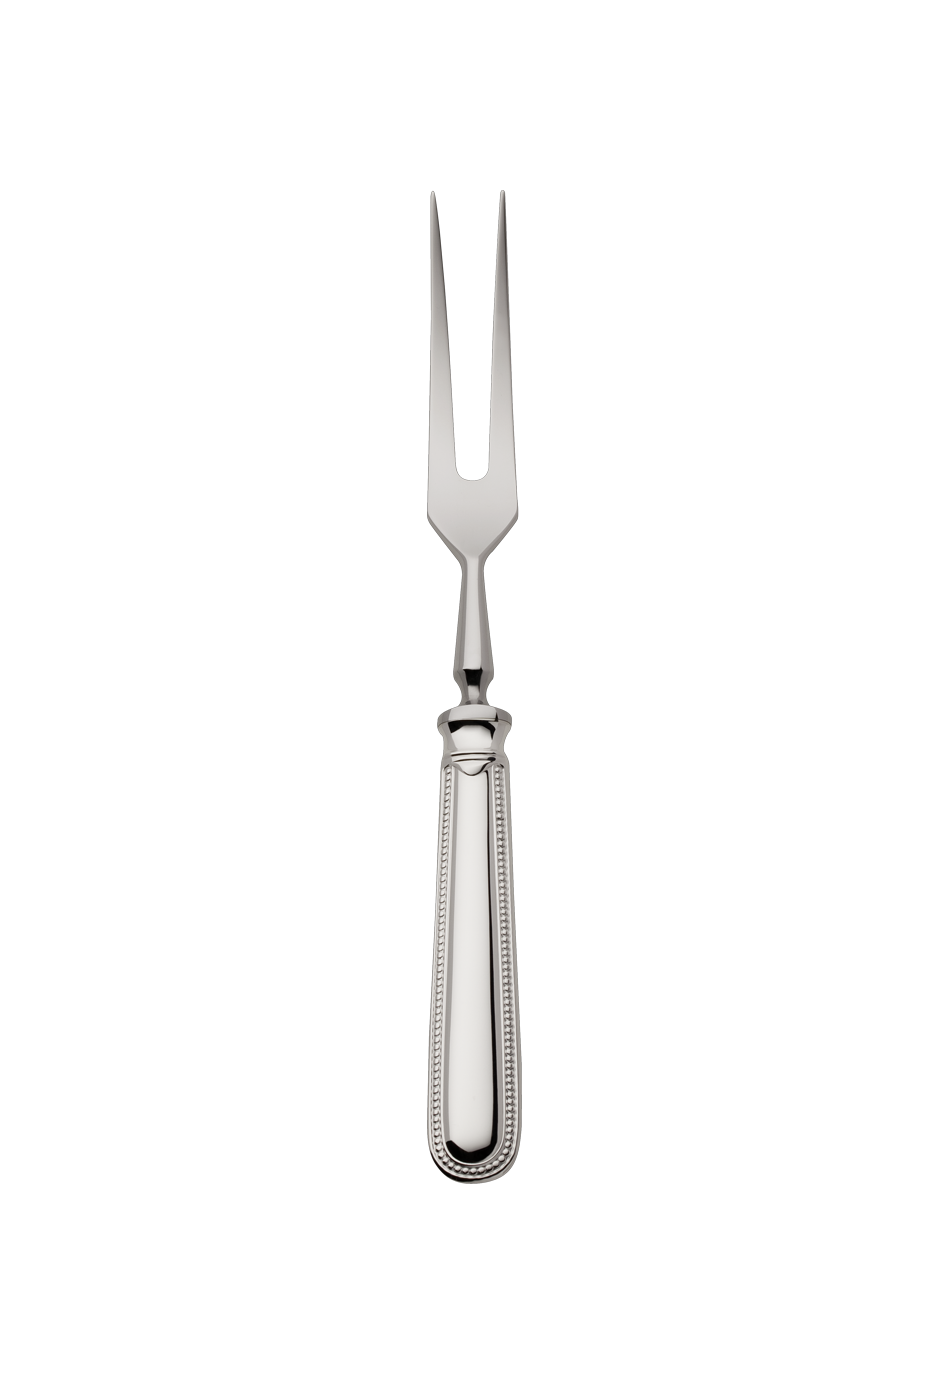 Franz. Perl Carving Fork (150g massive silverplated)